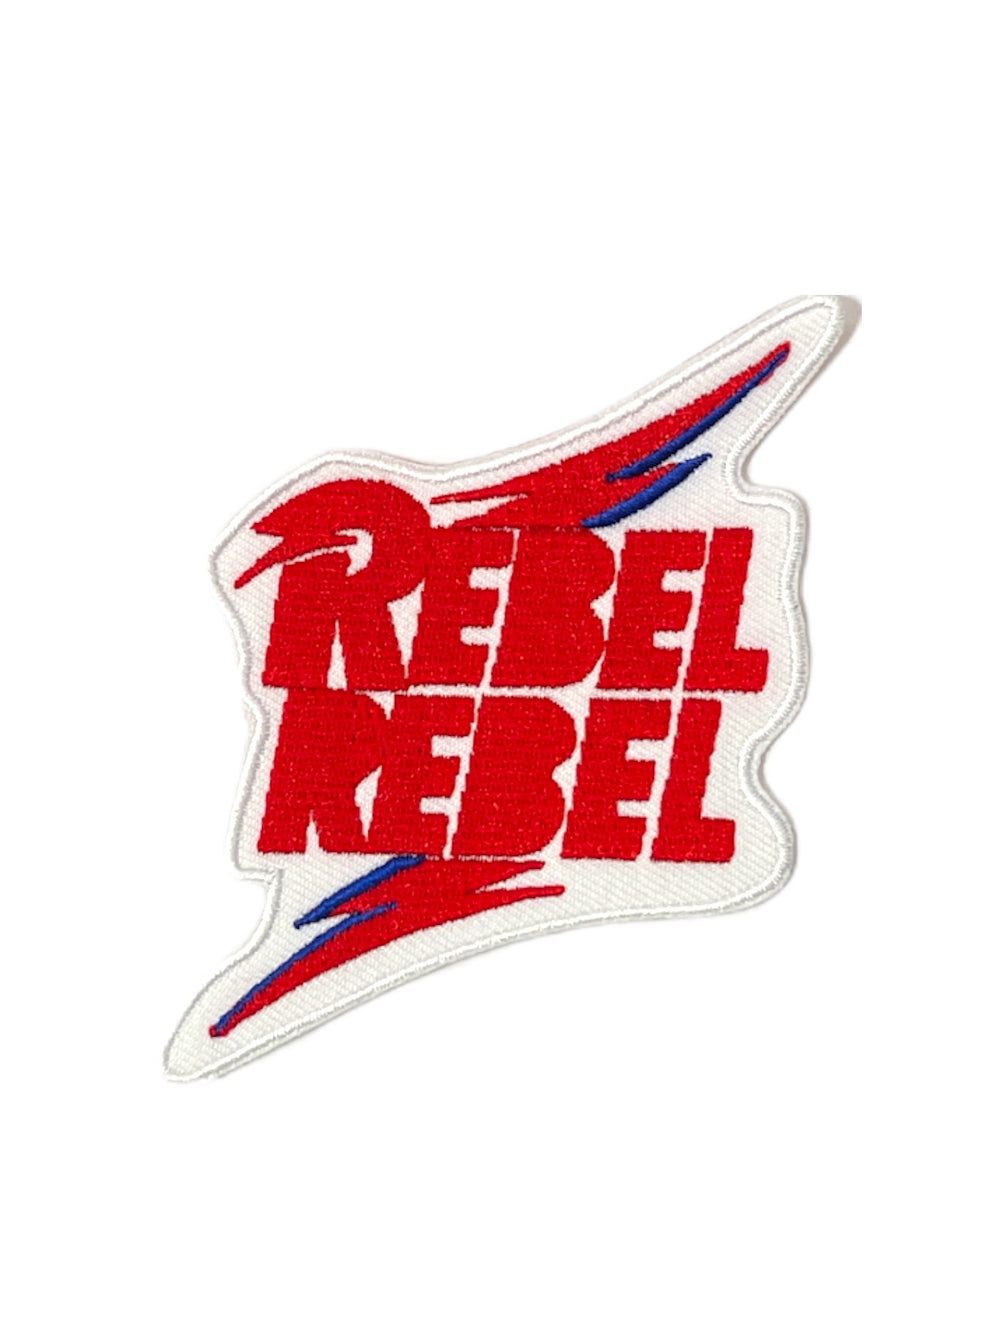 David Bowie Rebel Rebel Official Woven Patch Brand New Official